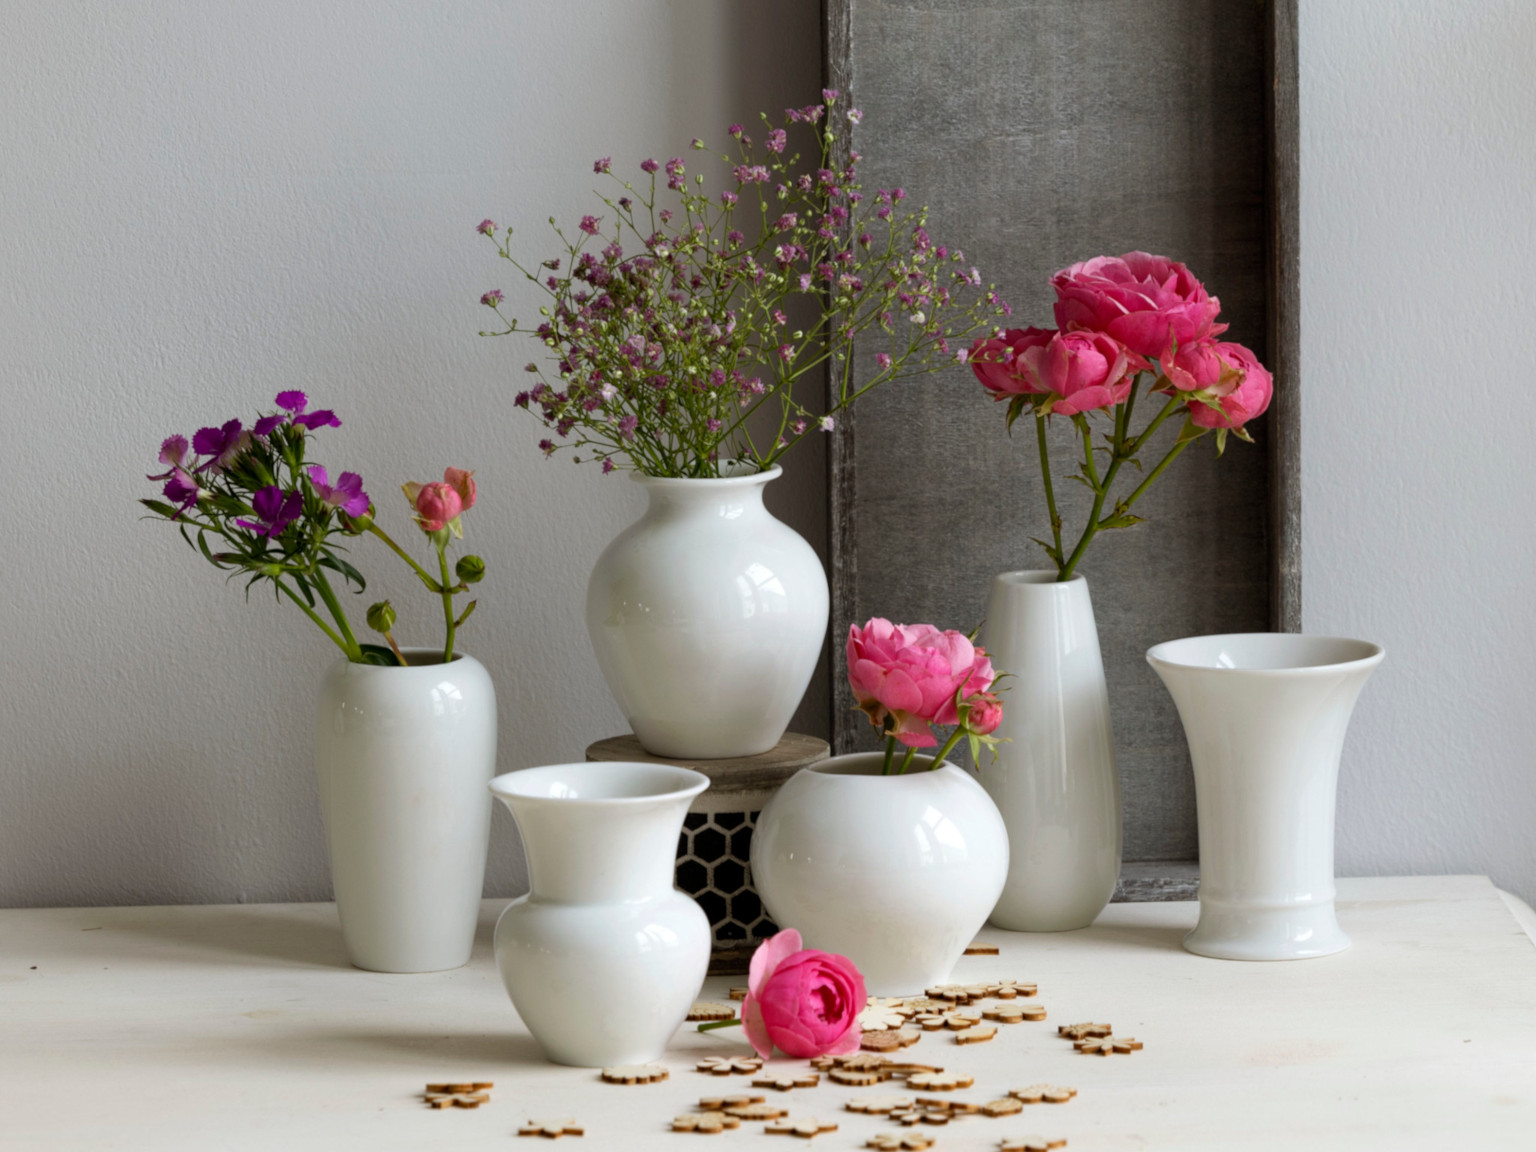 Six small white vases decorated with purple flowers from Hutschenreuther Flower Minis